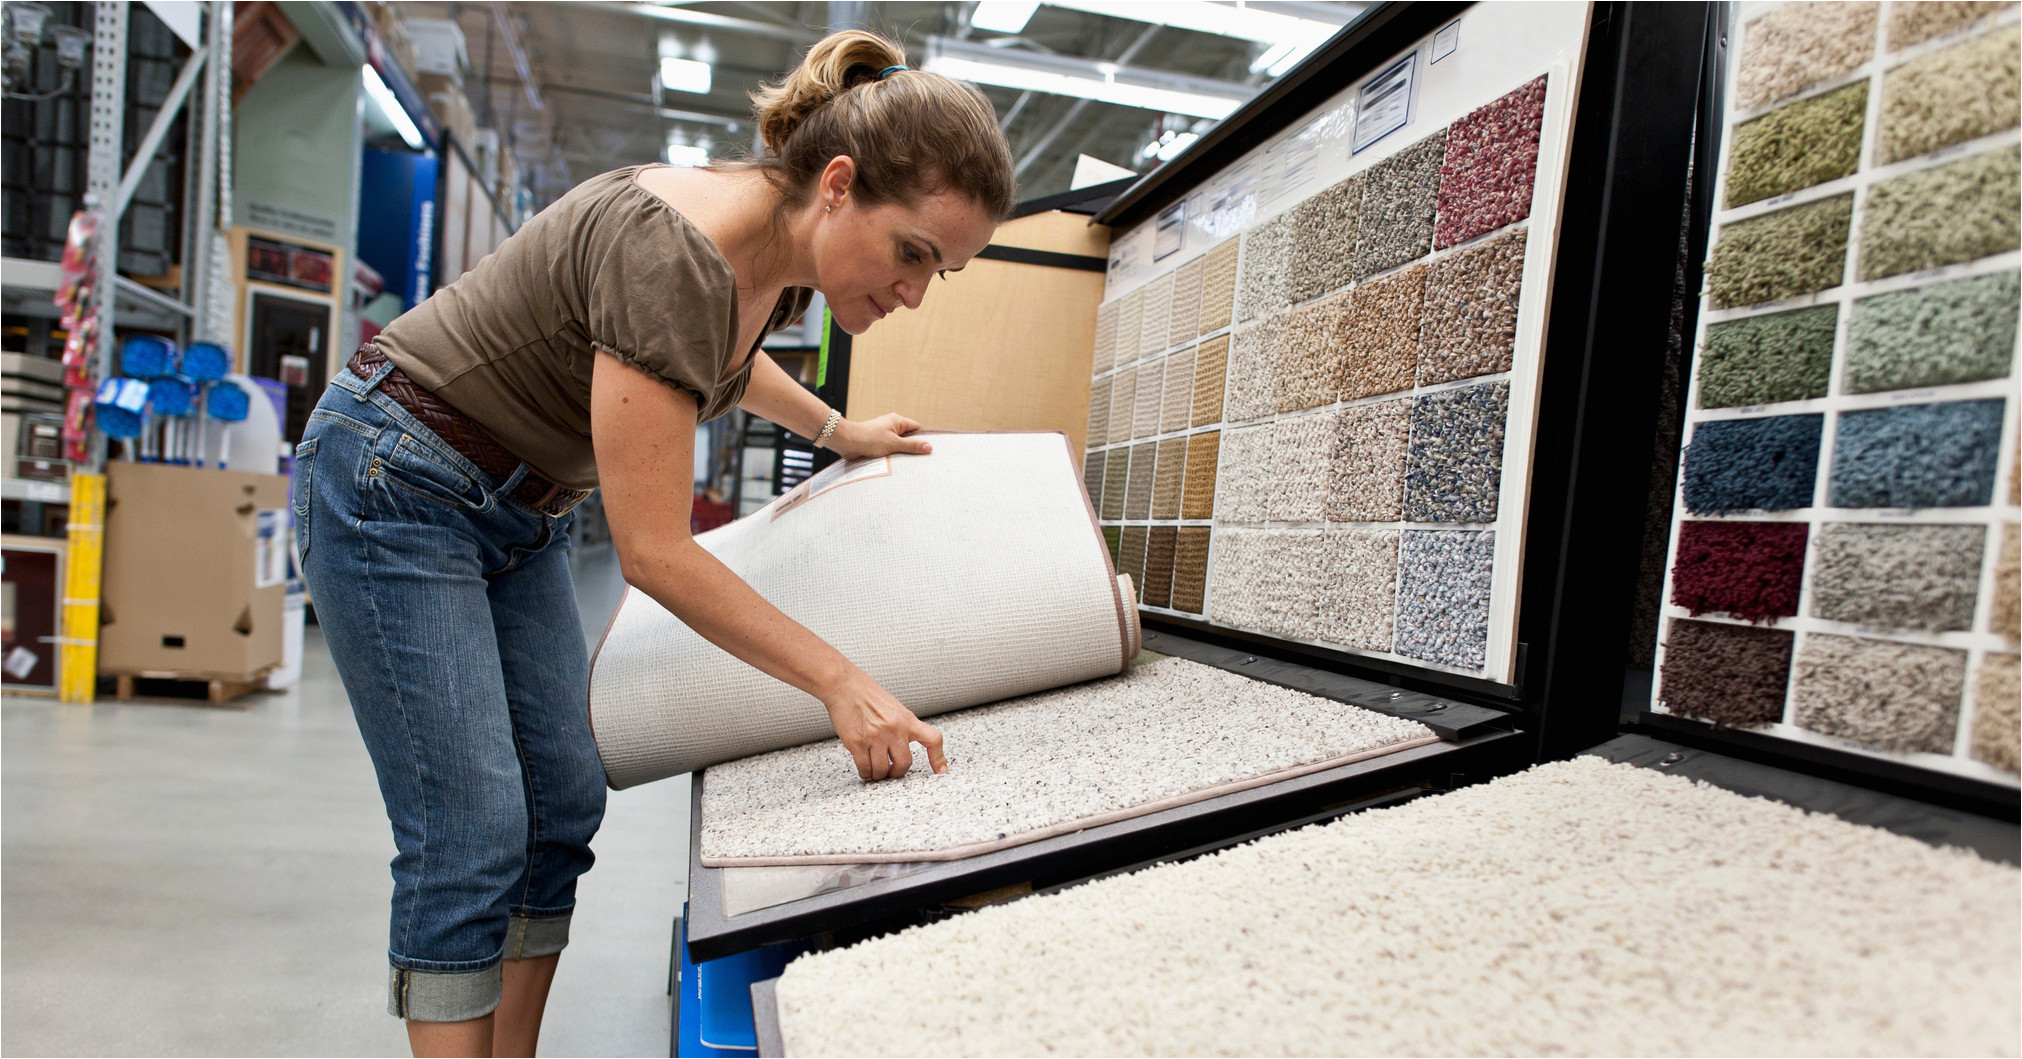 Home Depot In Store area Rugs the Home Depot Bans toxic Pfas In Carpets and Rugs It Sells …